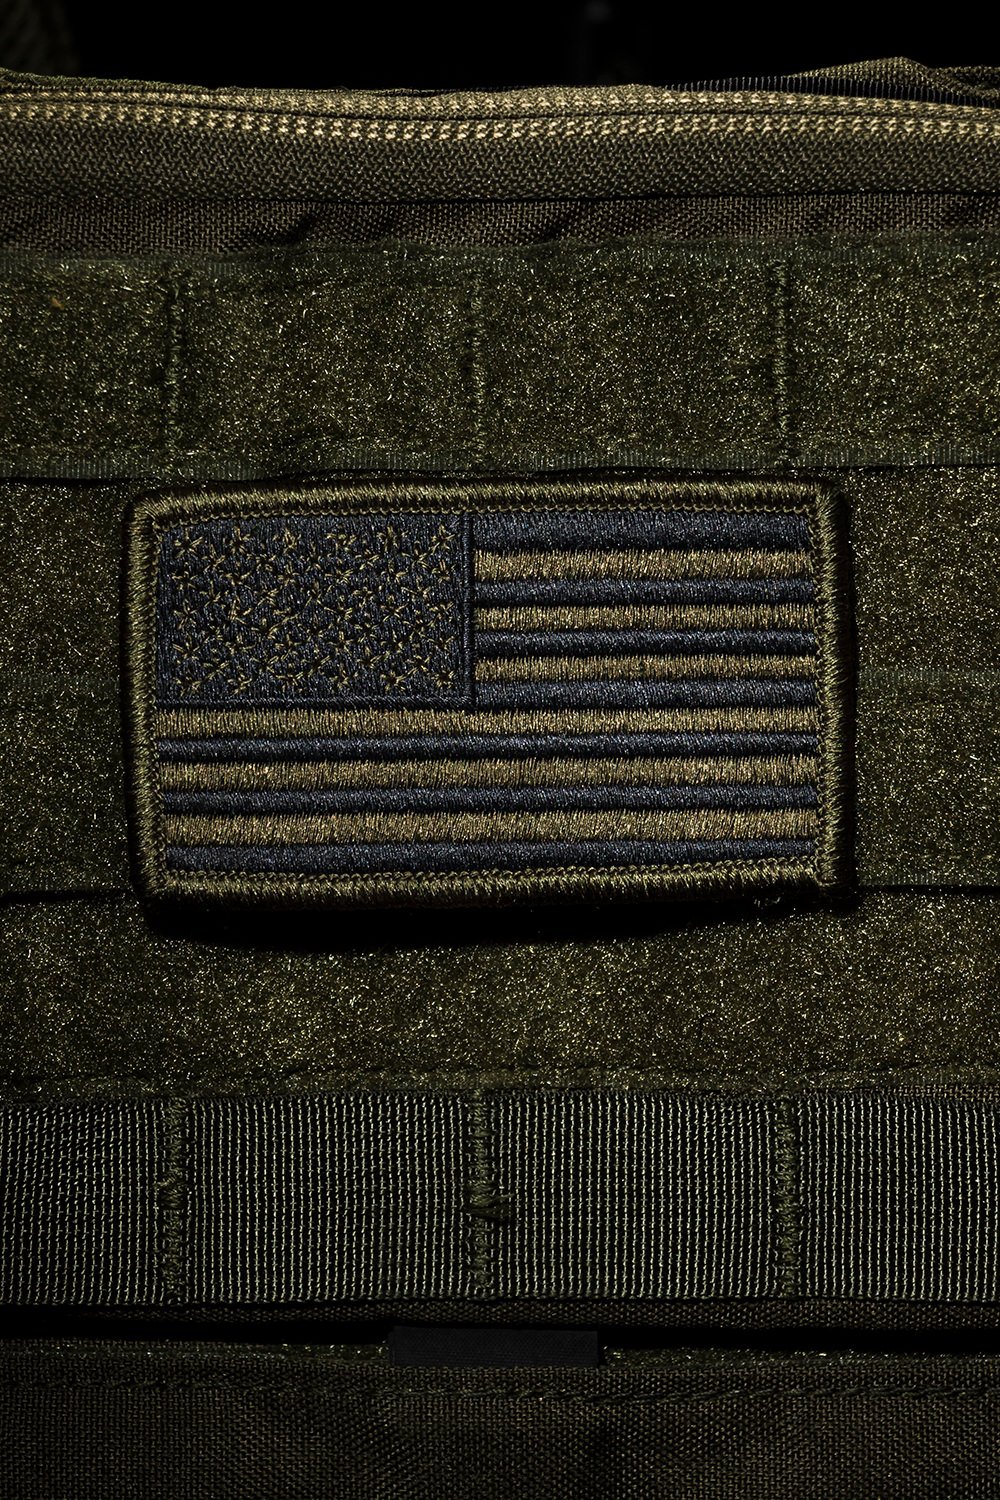 Olive Drab American Flag Patch